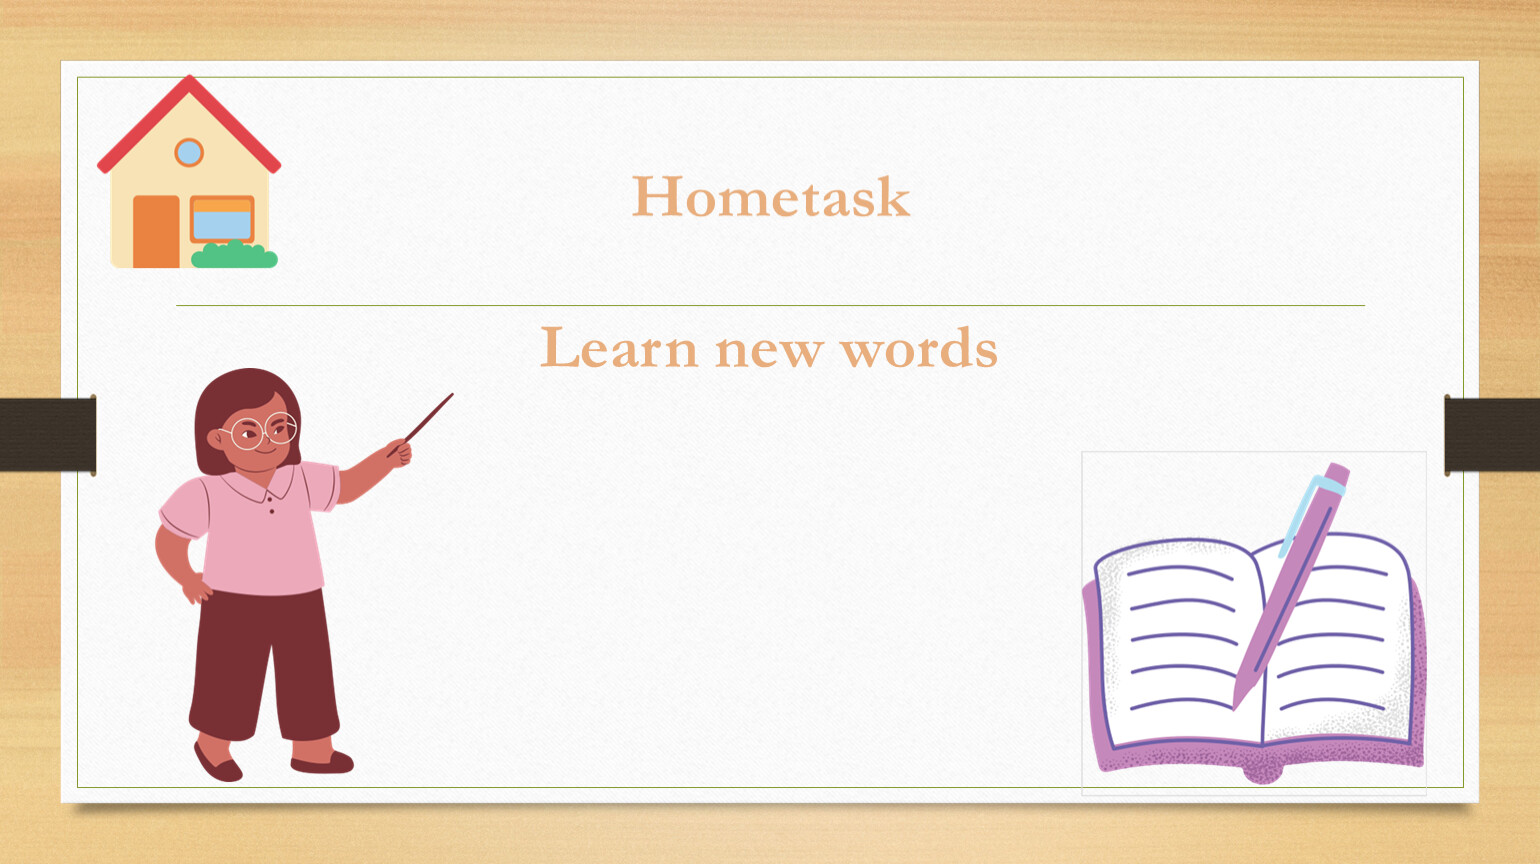 We learn new words. To learn New Words. Learning New Words. New Words картинка. Hometask learn the New Words.